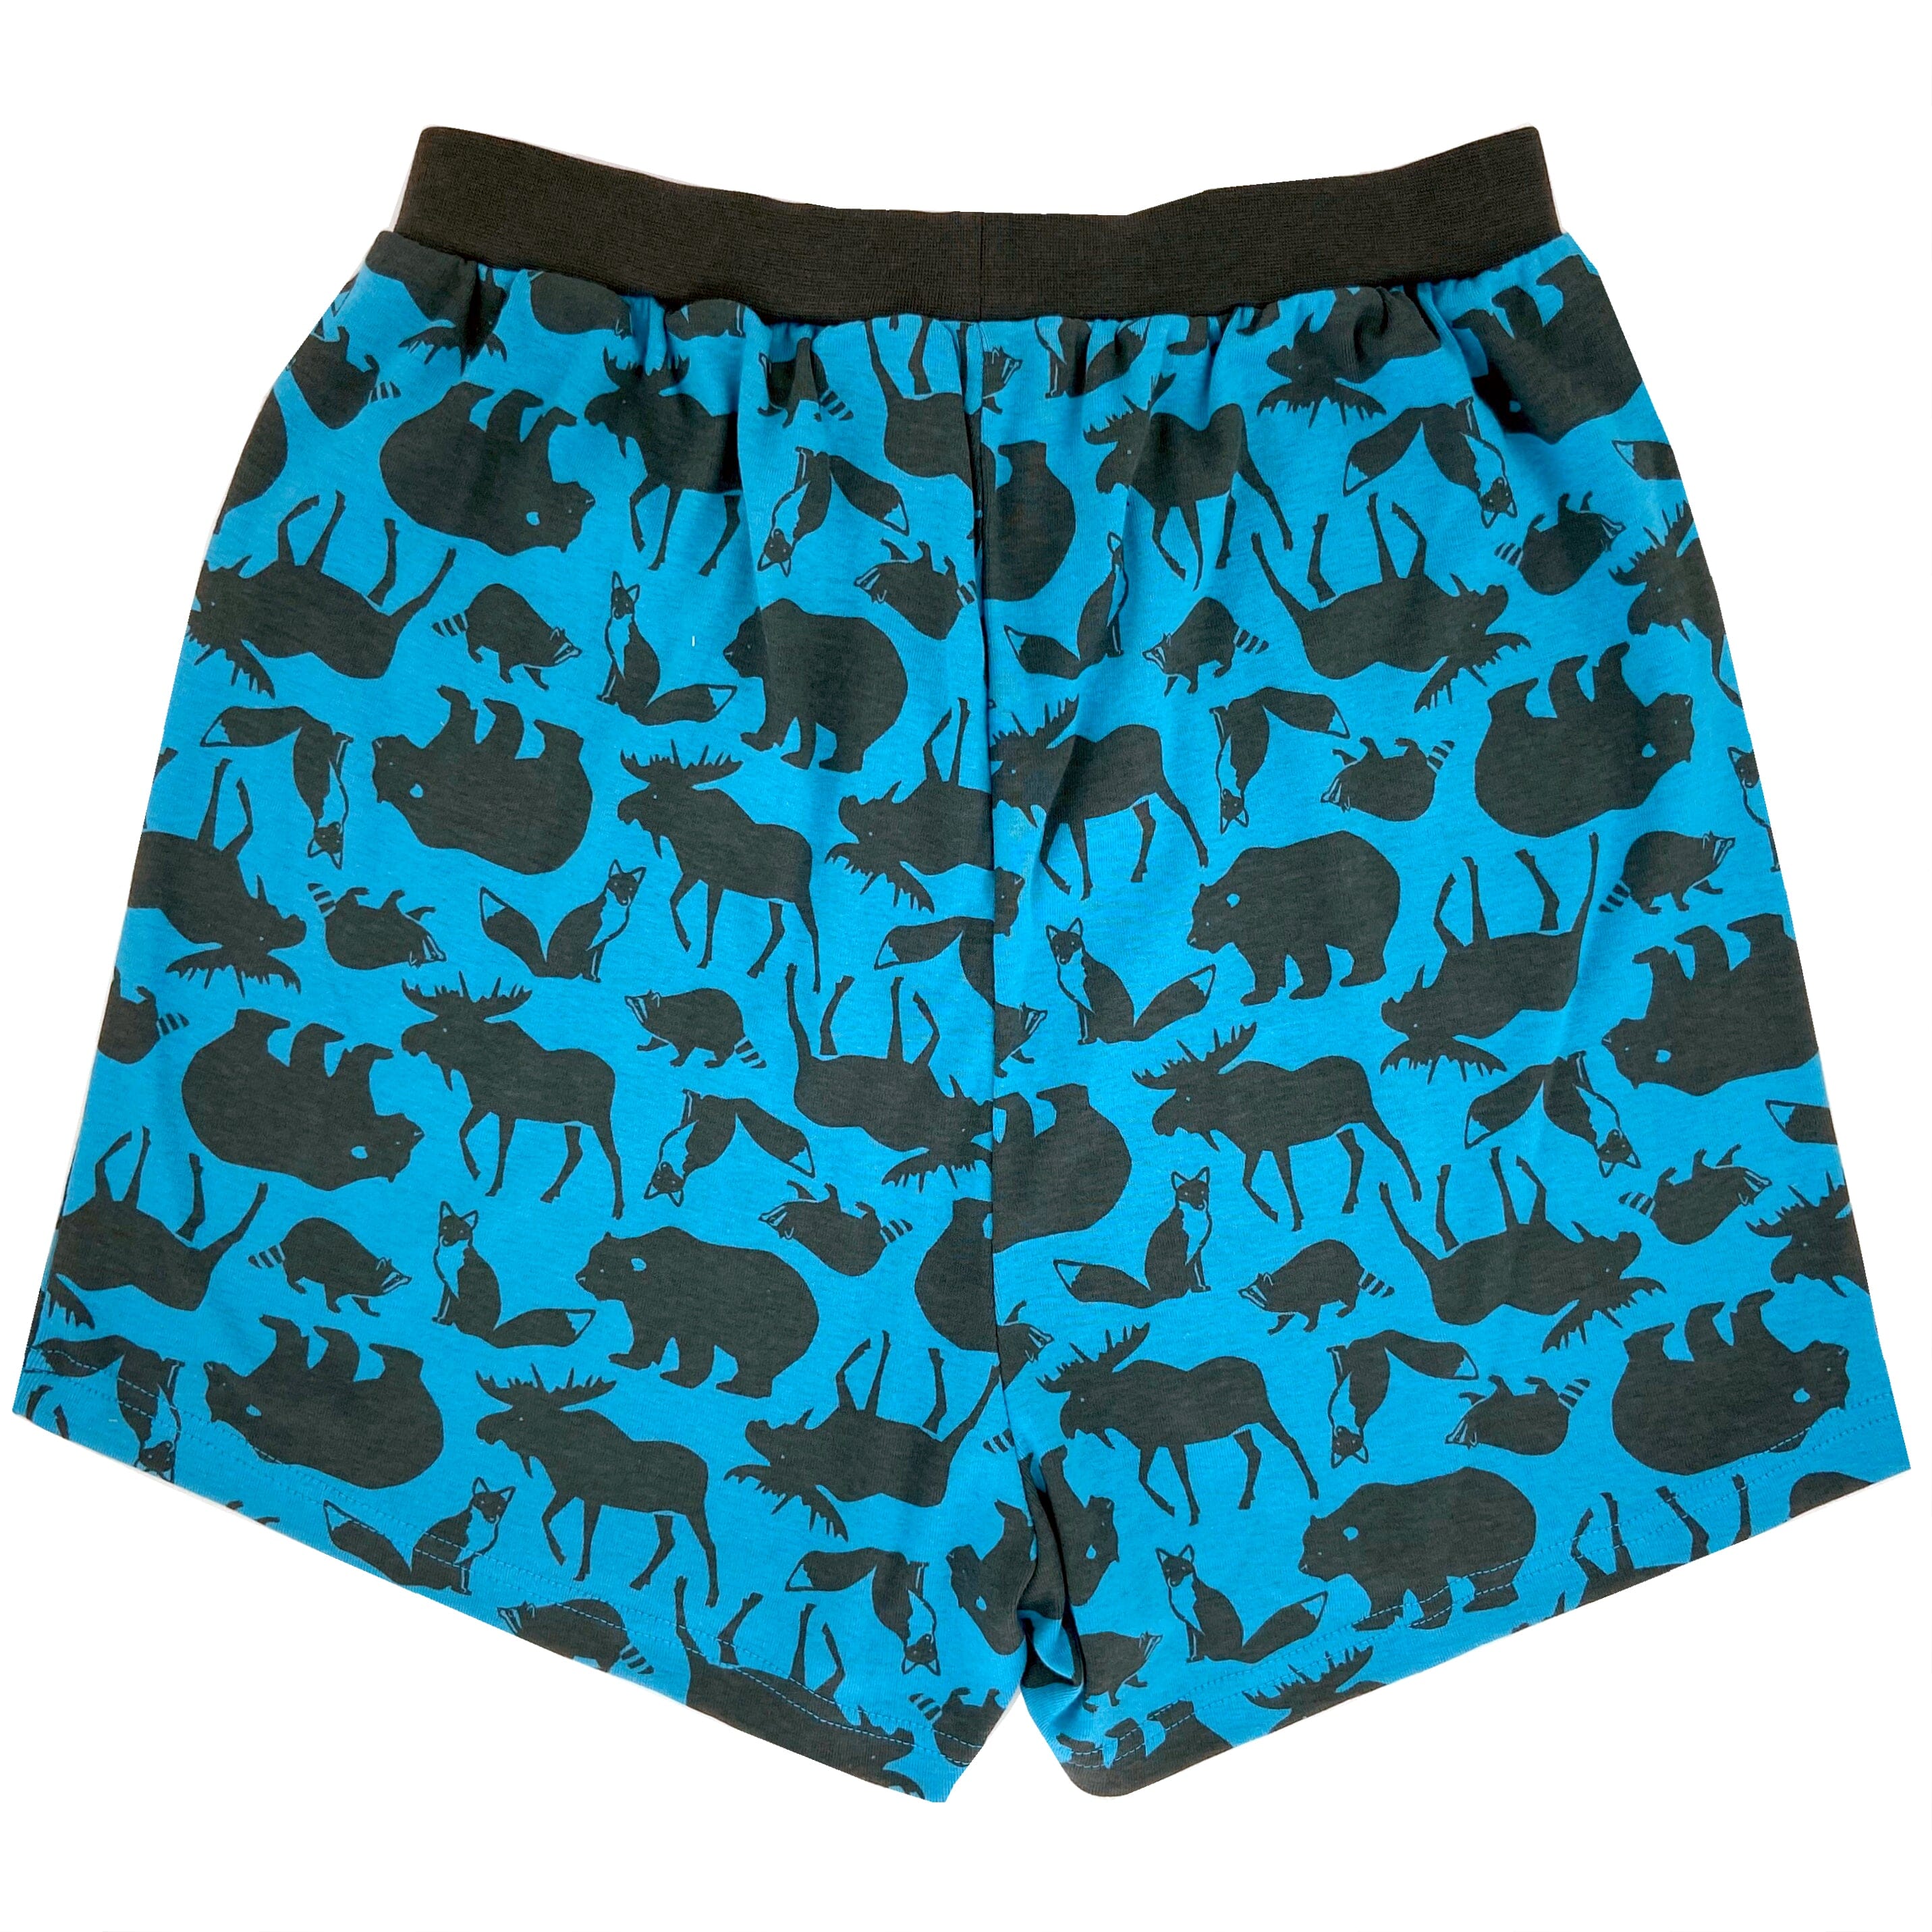 Soft T-Shirt Fabric Cotton Knit Boxer Pajama Shorts for Men with Woodland Creature Animal Print